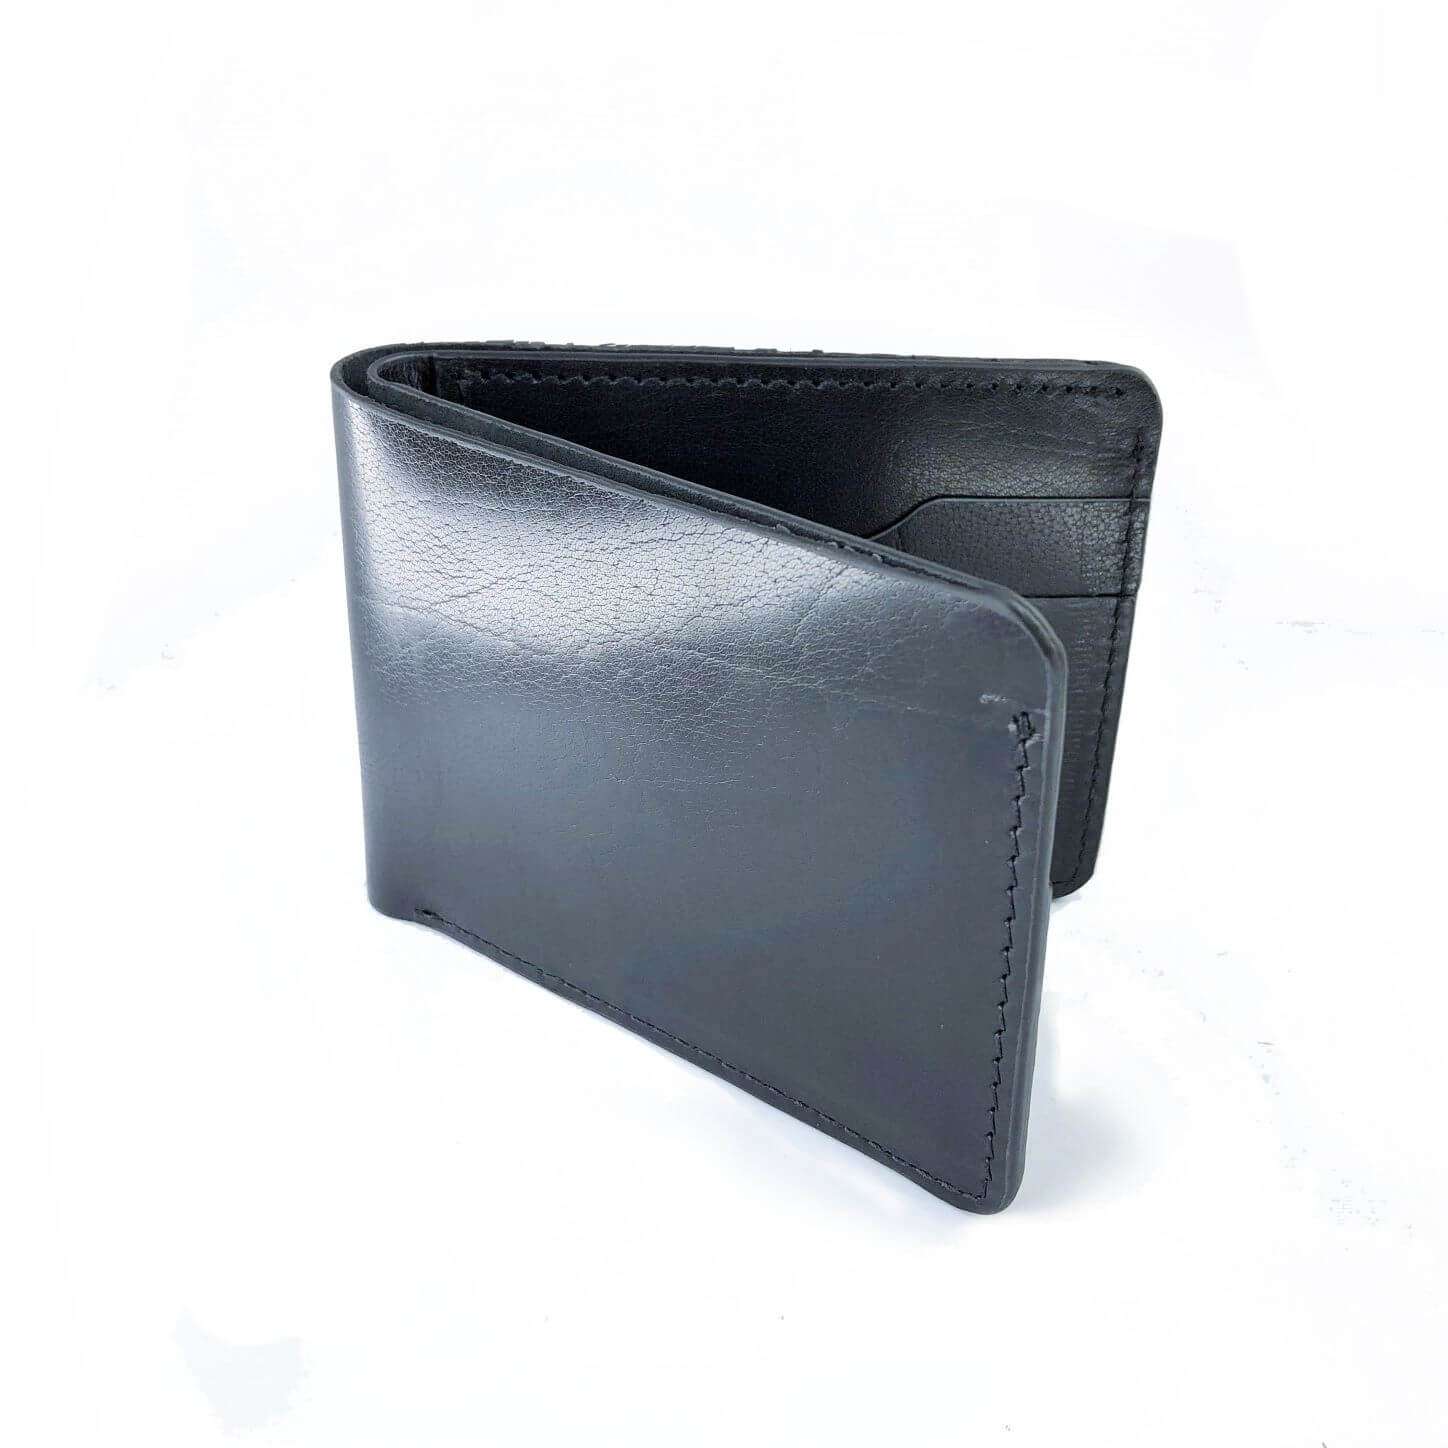 The Bold | Bi-fold Leather Wallet